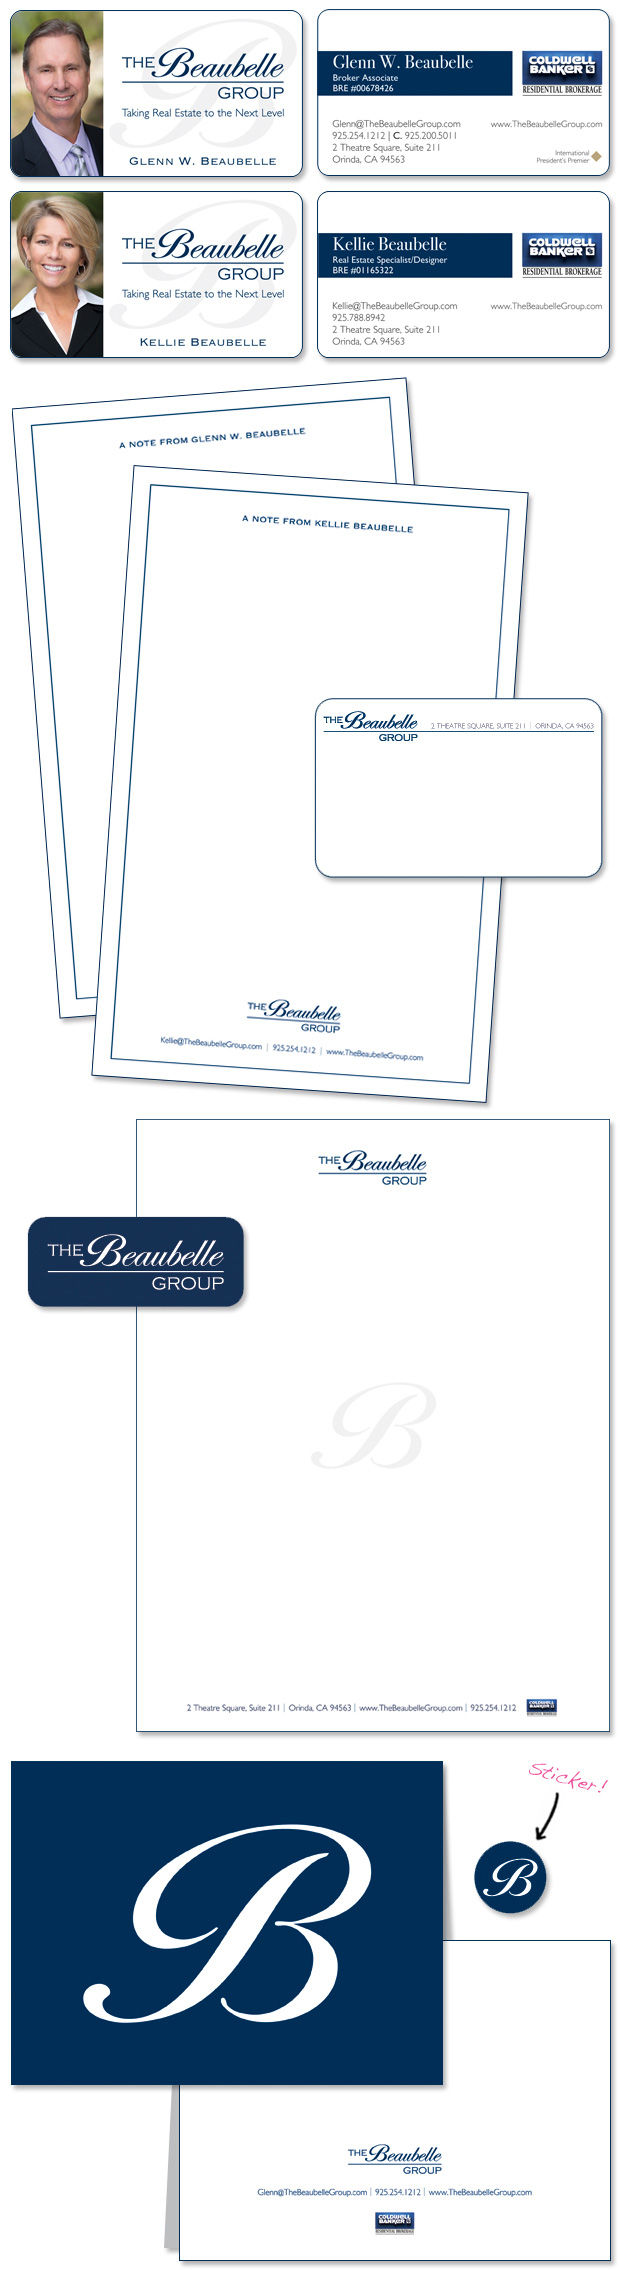 The Beaubelle Group/Coldwell Banker